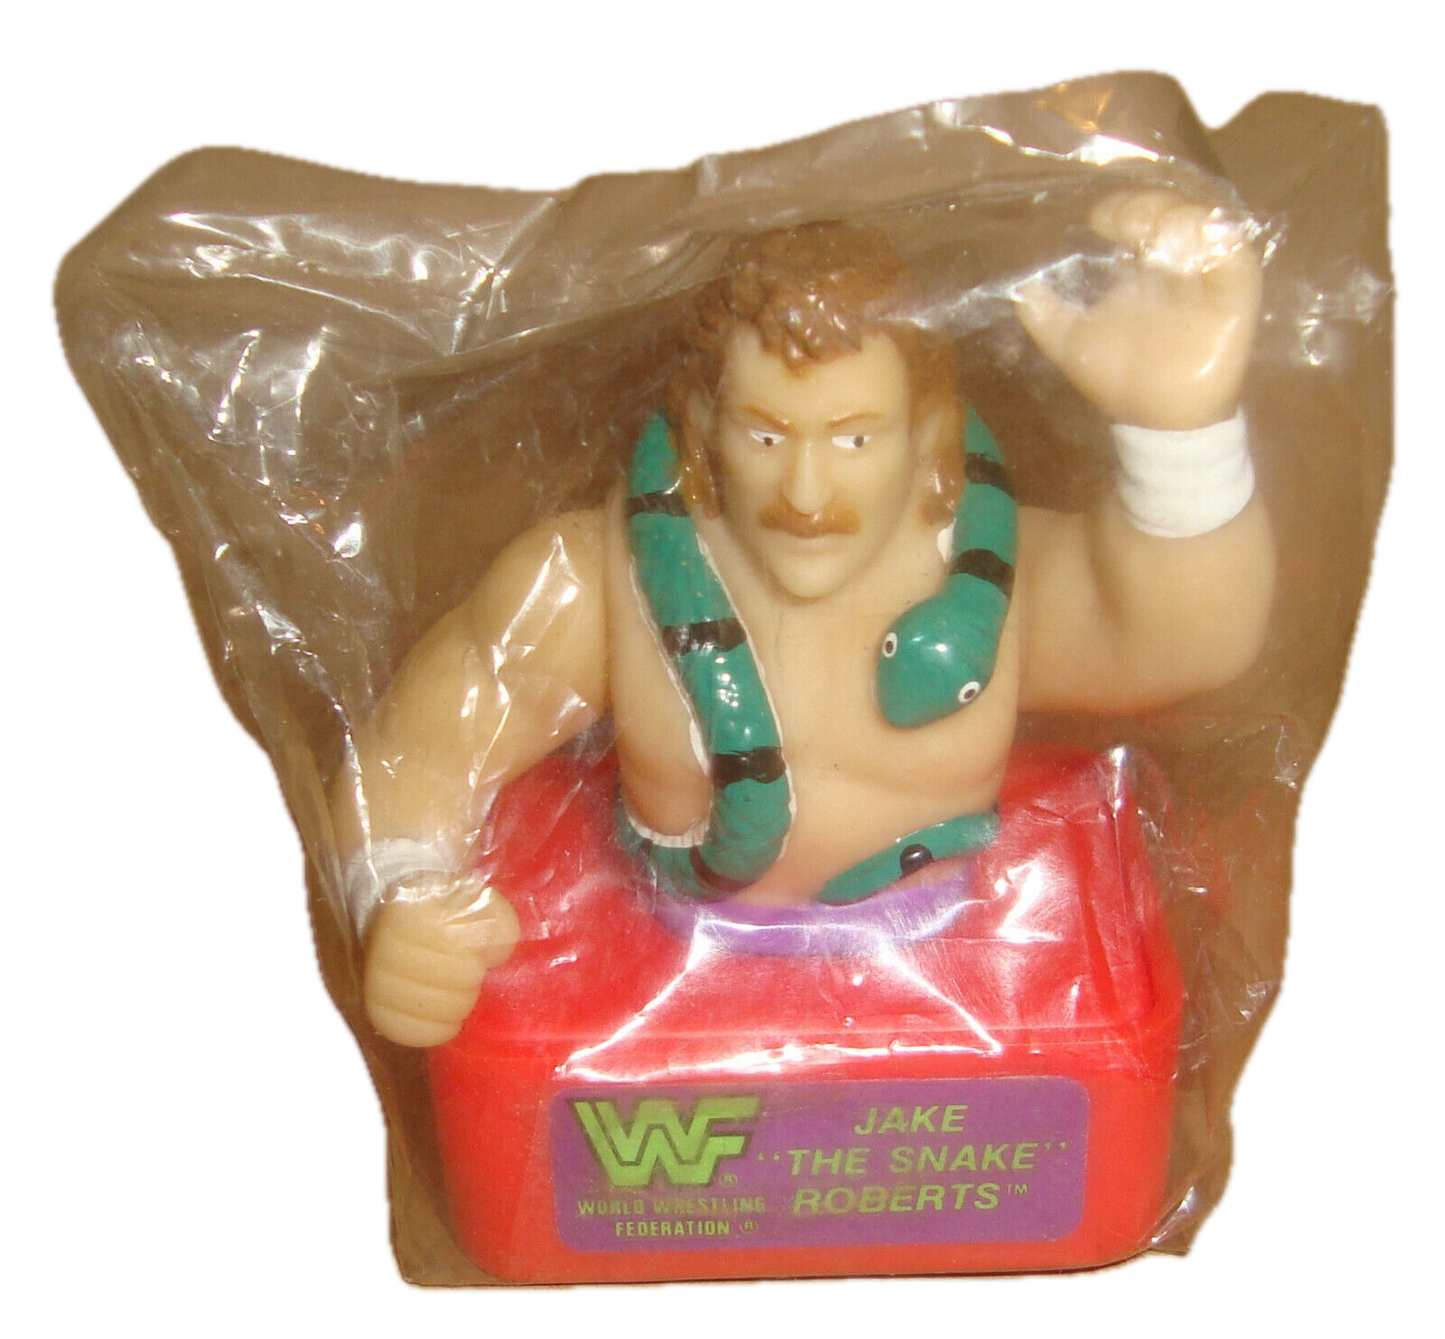 1991 WWF Noteworthy Action Superstars Stampers Jake "The Snake" Roberts [Bagged]